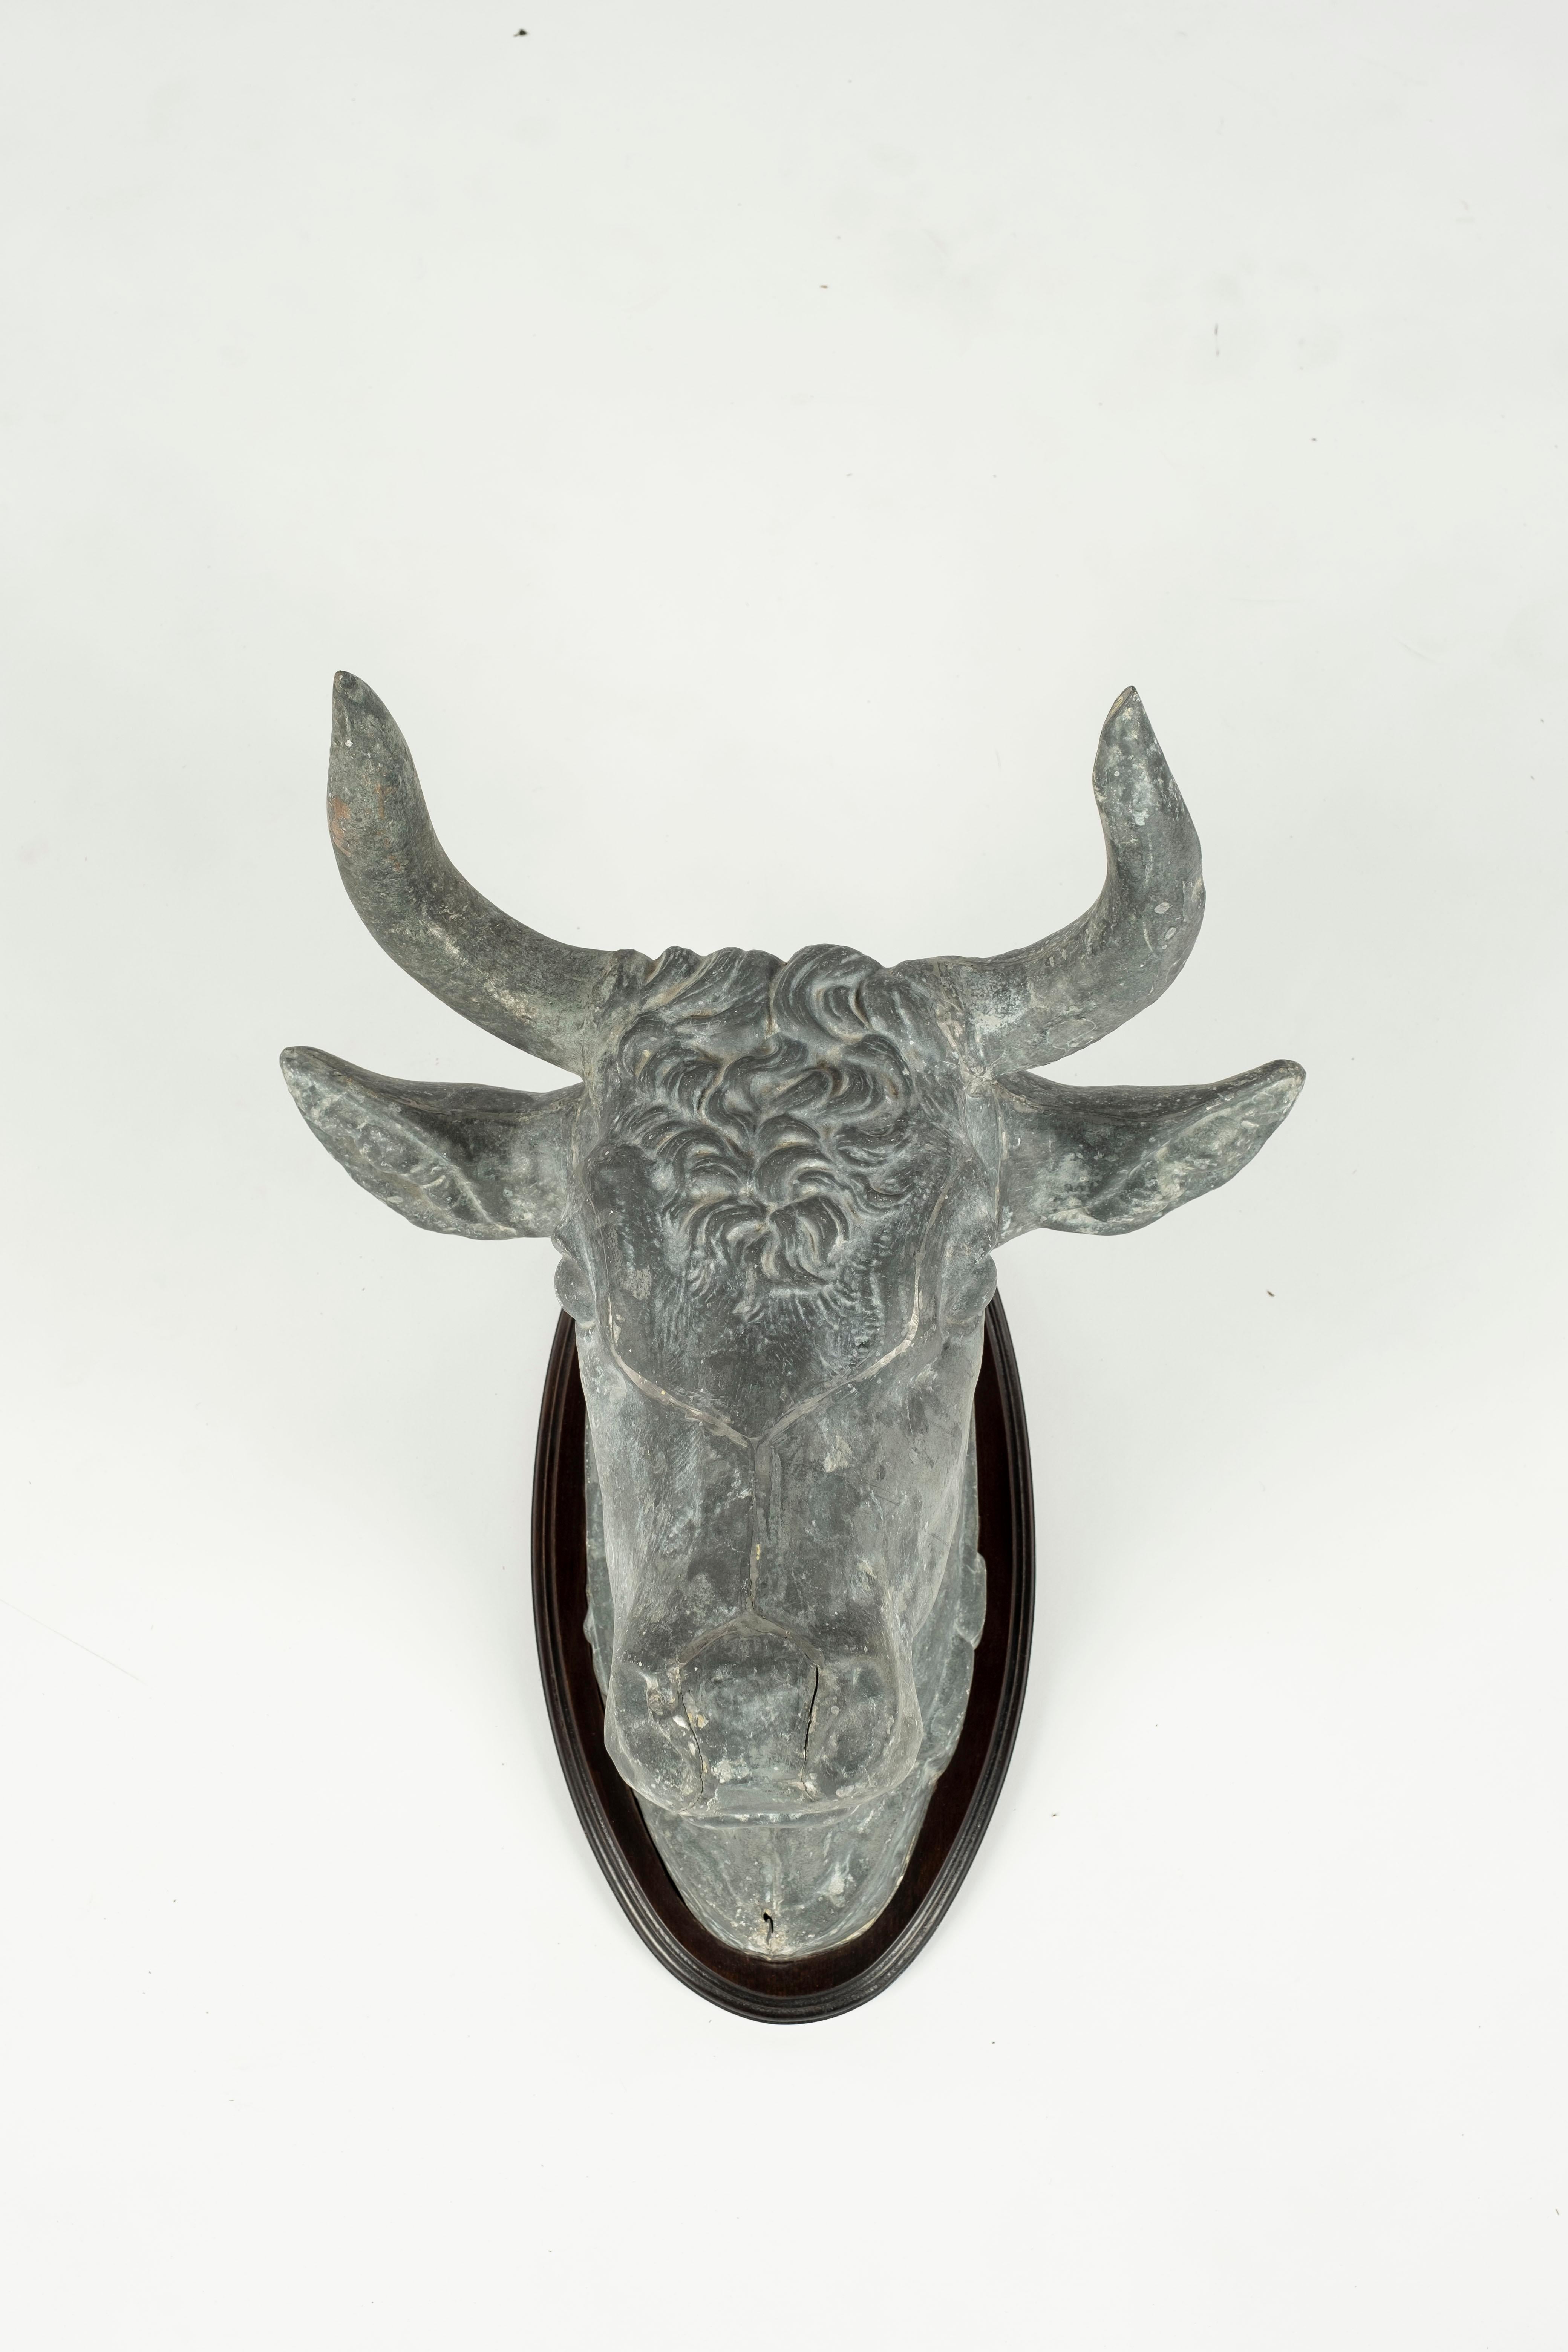 Zinc Bull's Head originally used as a butcher's sign in France. Beautiful detail to the face area. Head has been mounted on a wooden plaque for display purposes.